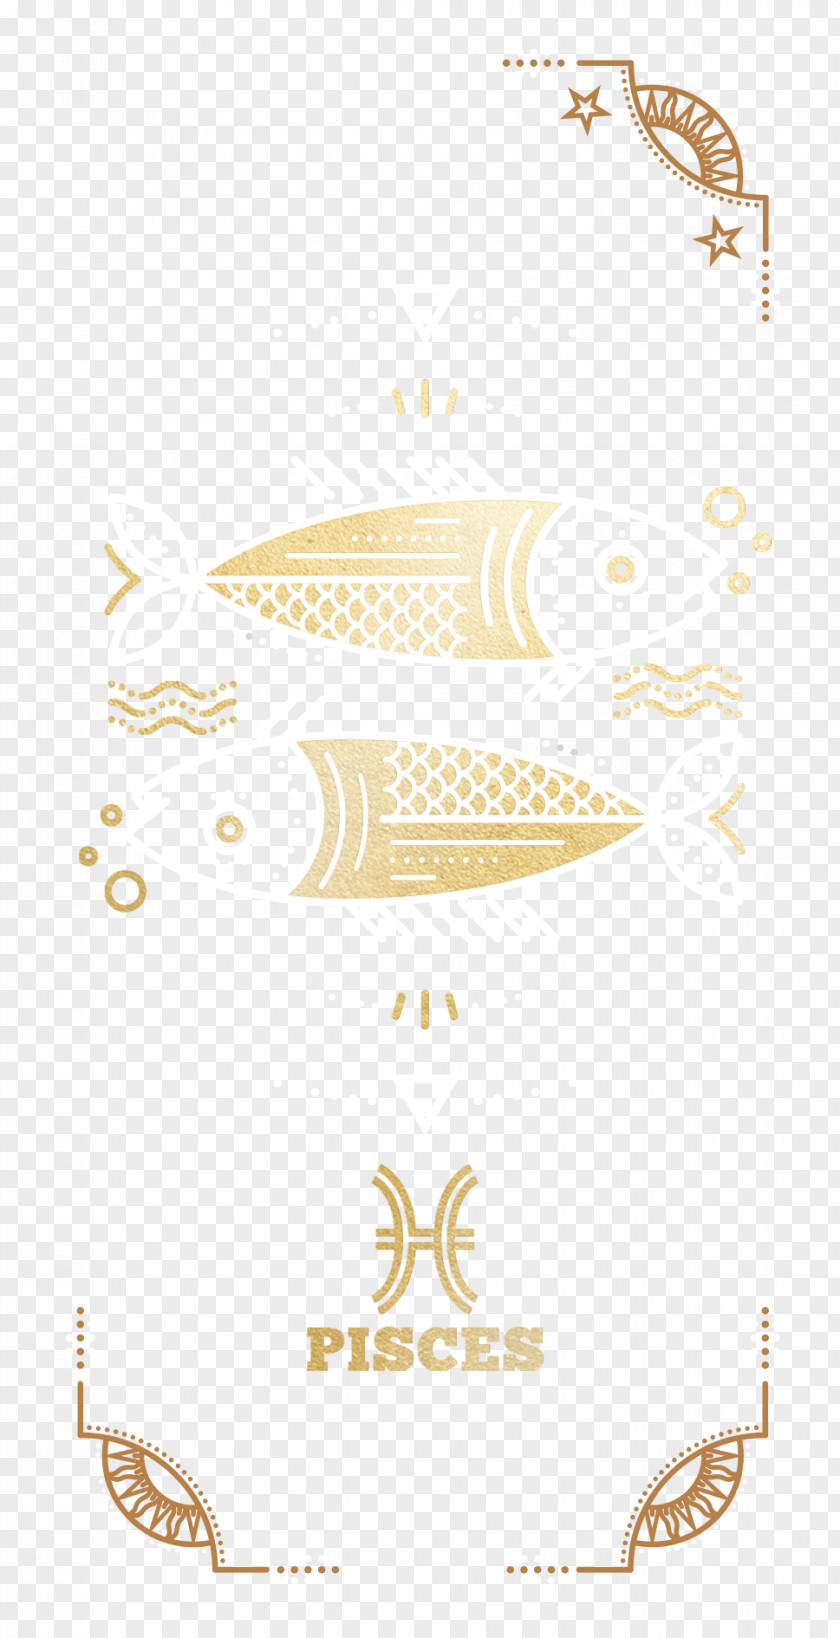 Pisces Calligraphy PNG